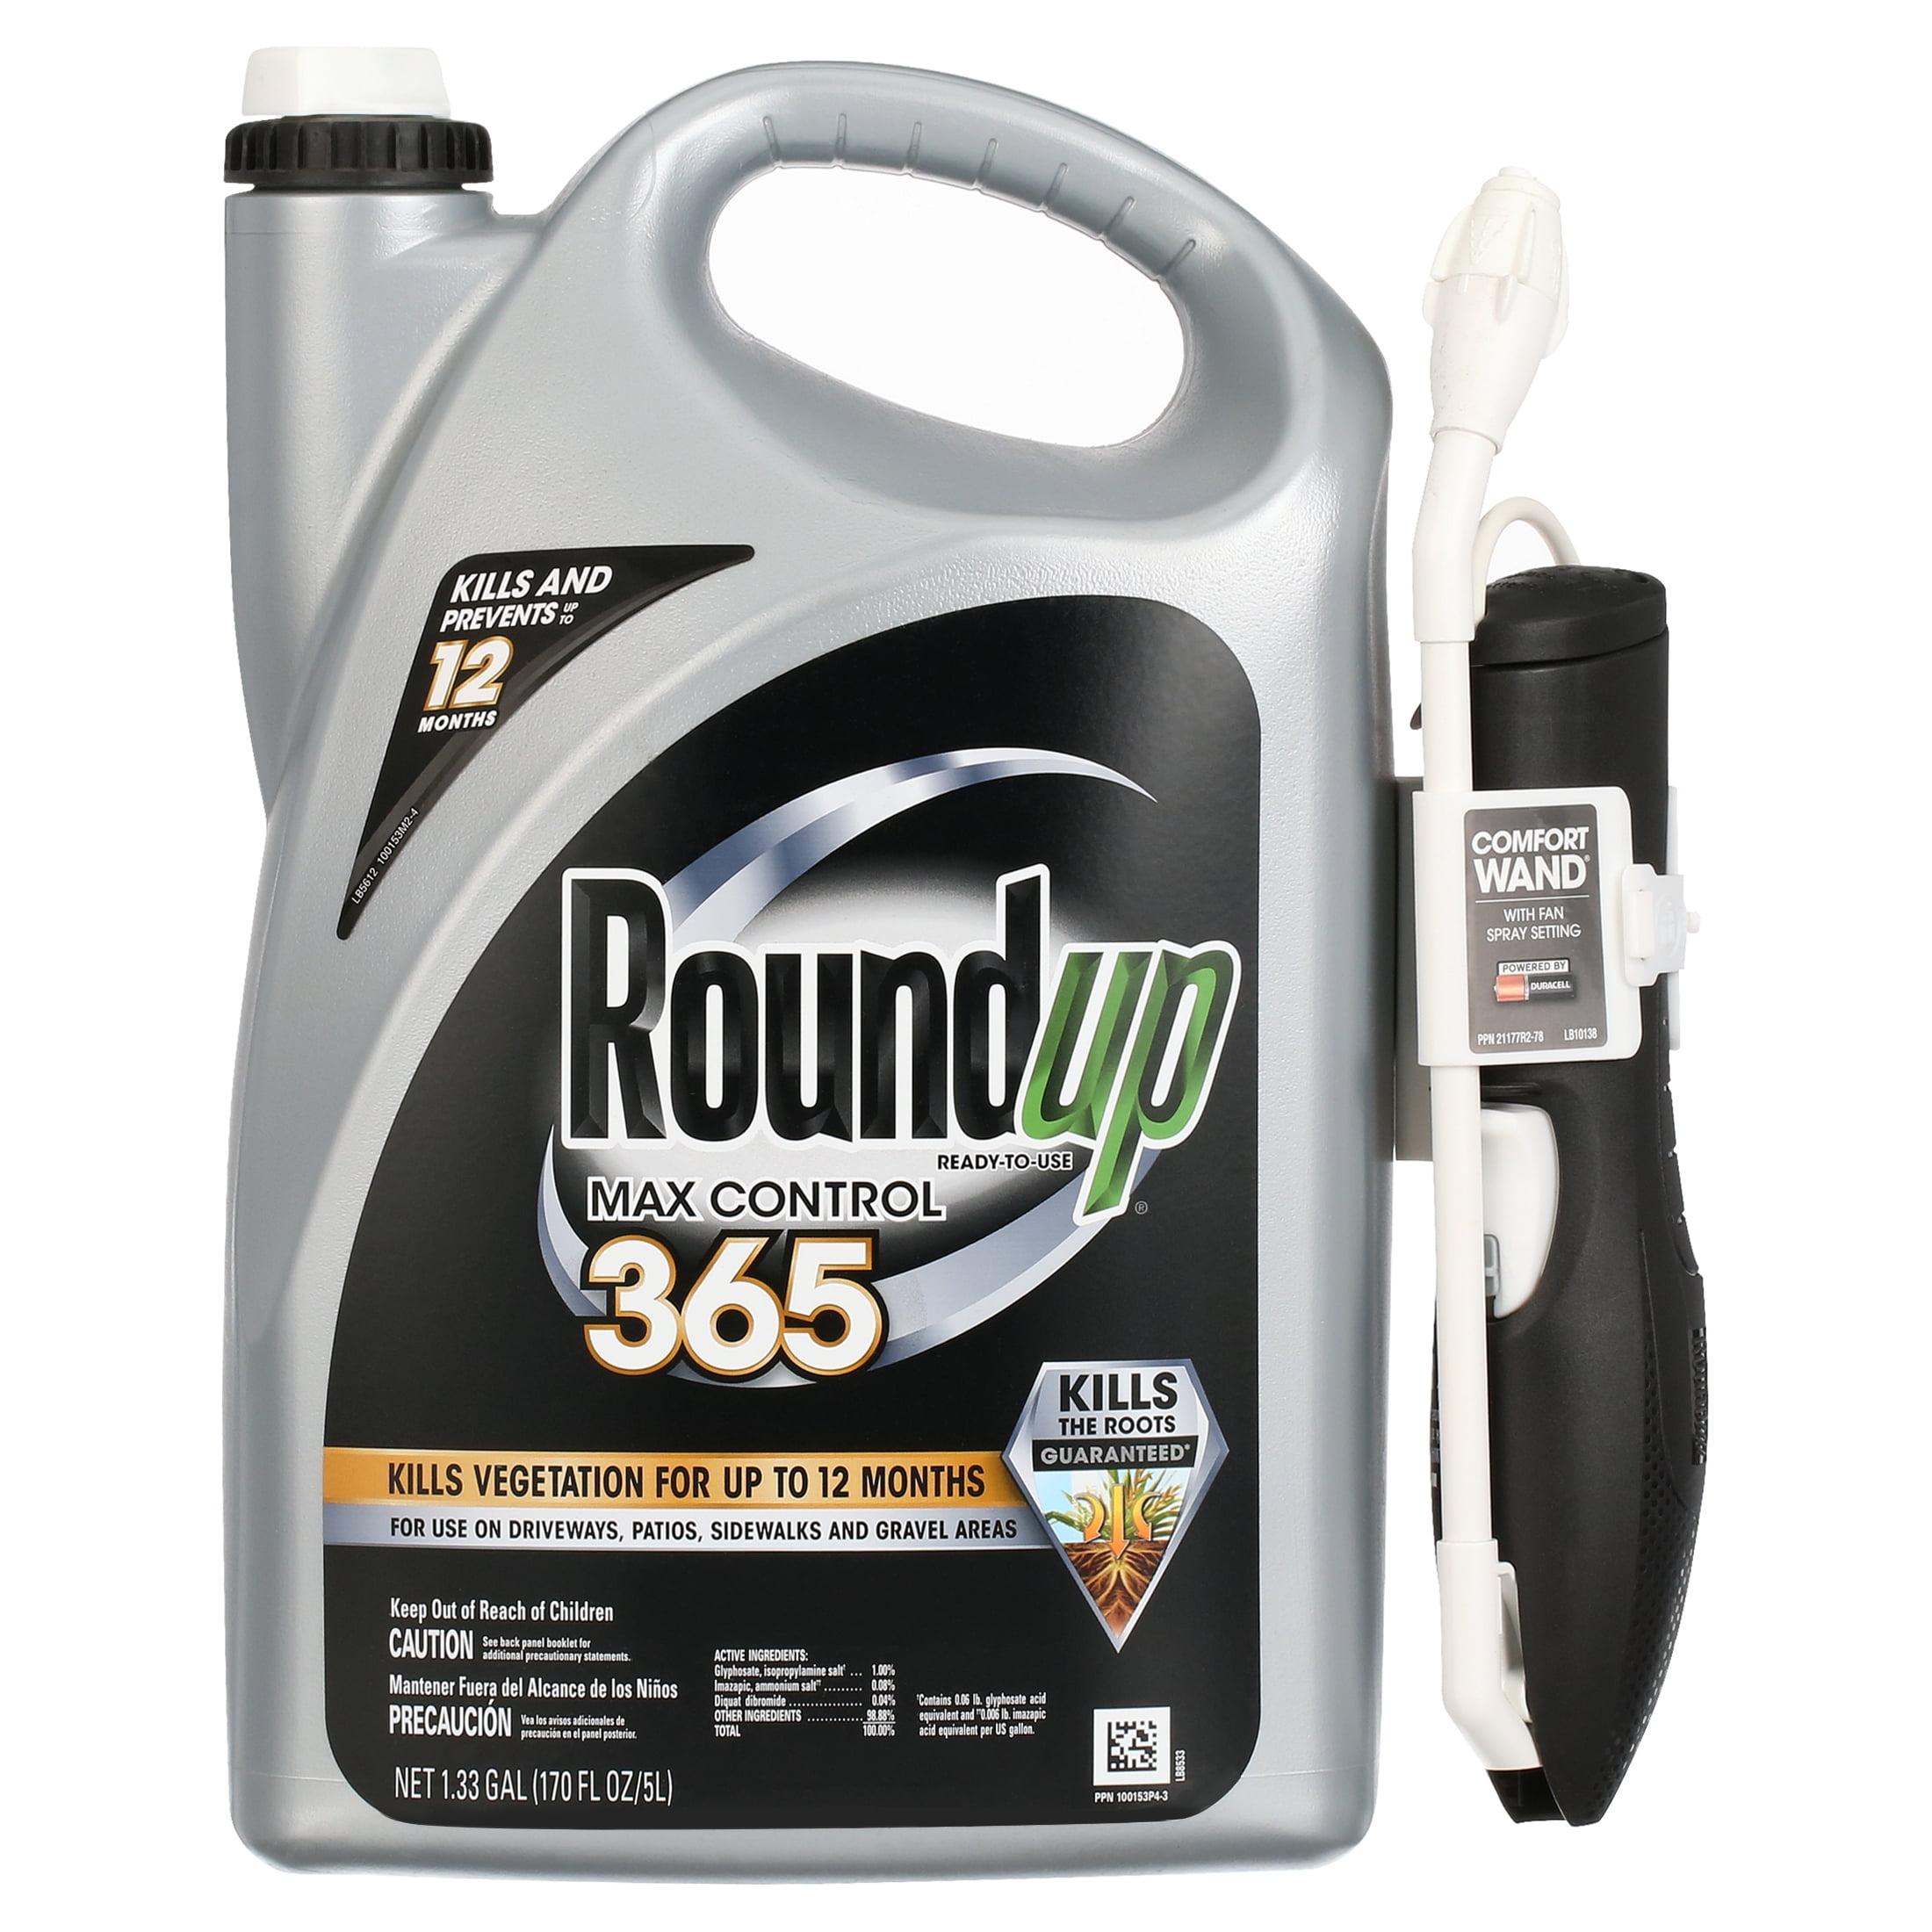 Roundup Ready-To-Use Max Control 365 with Comfort Wand 1.33 gal. - 3